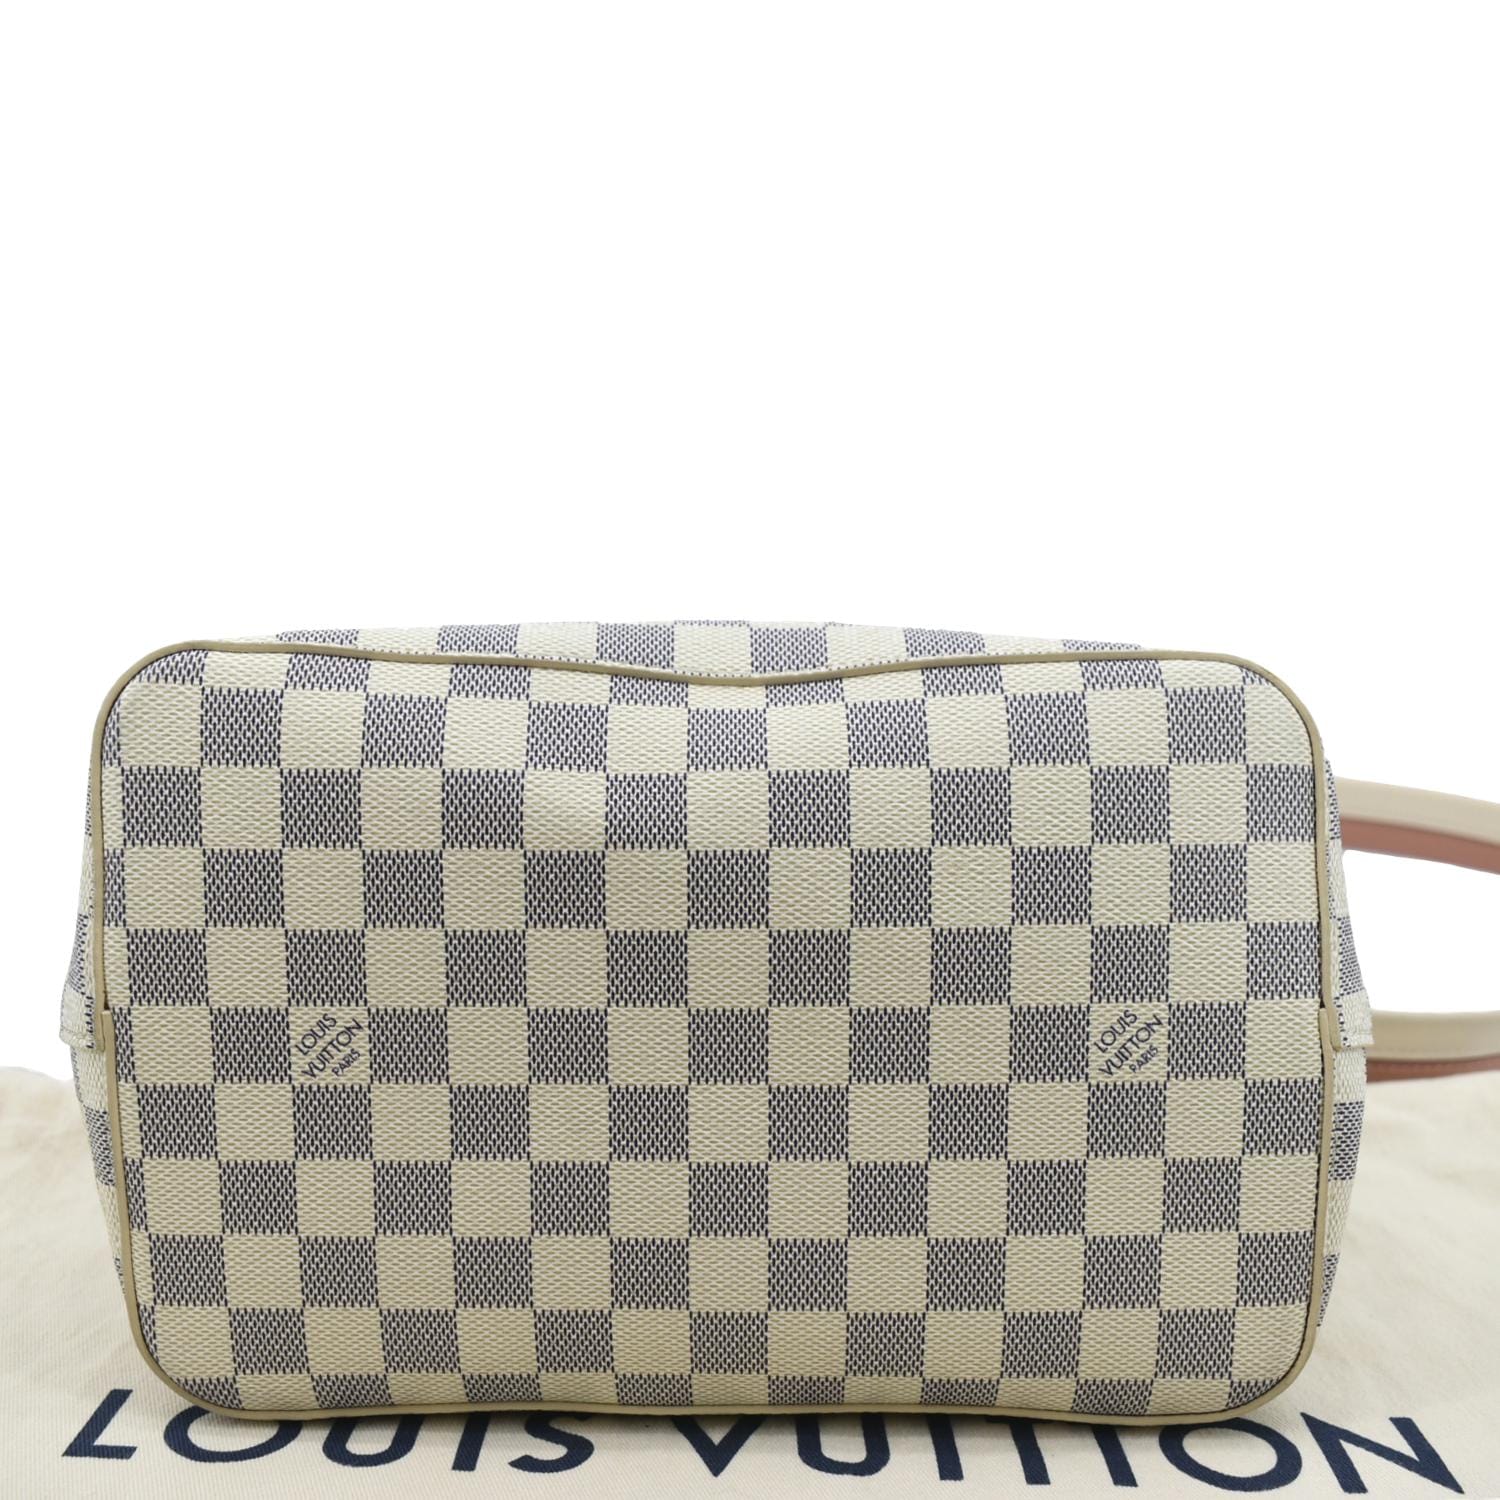 Louis Vuitton Damier Azur Canvas with Braided Handle NeoNoe BB Bag – Italy  Station